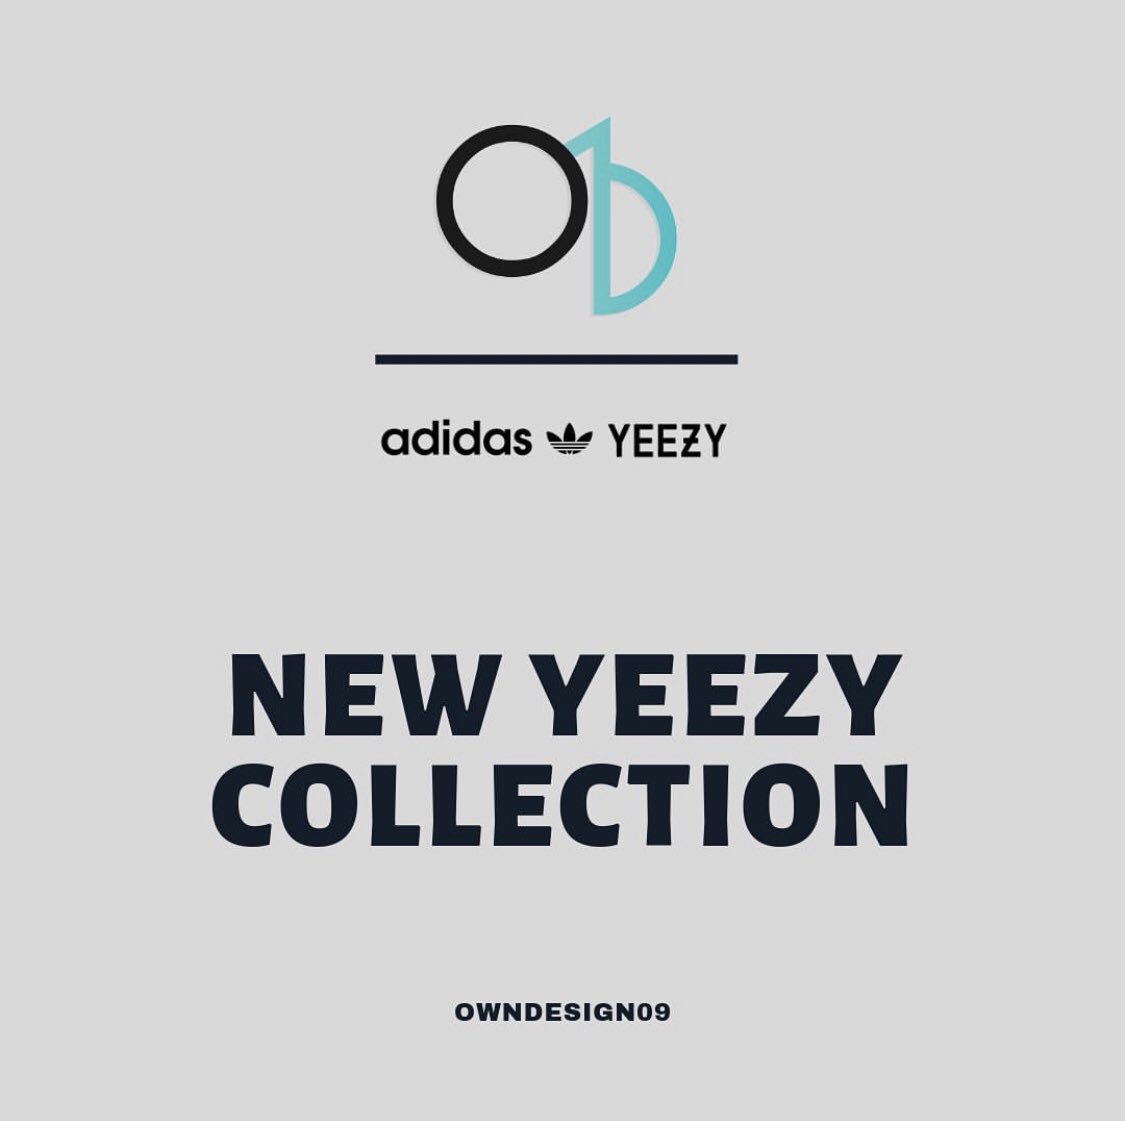 Now available at #owndesign09 Store ‼️🚨 #yeezy #yeezyv2 
#adidas